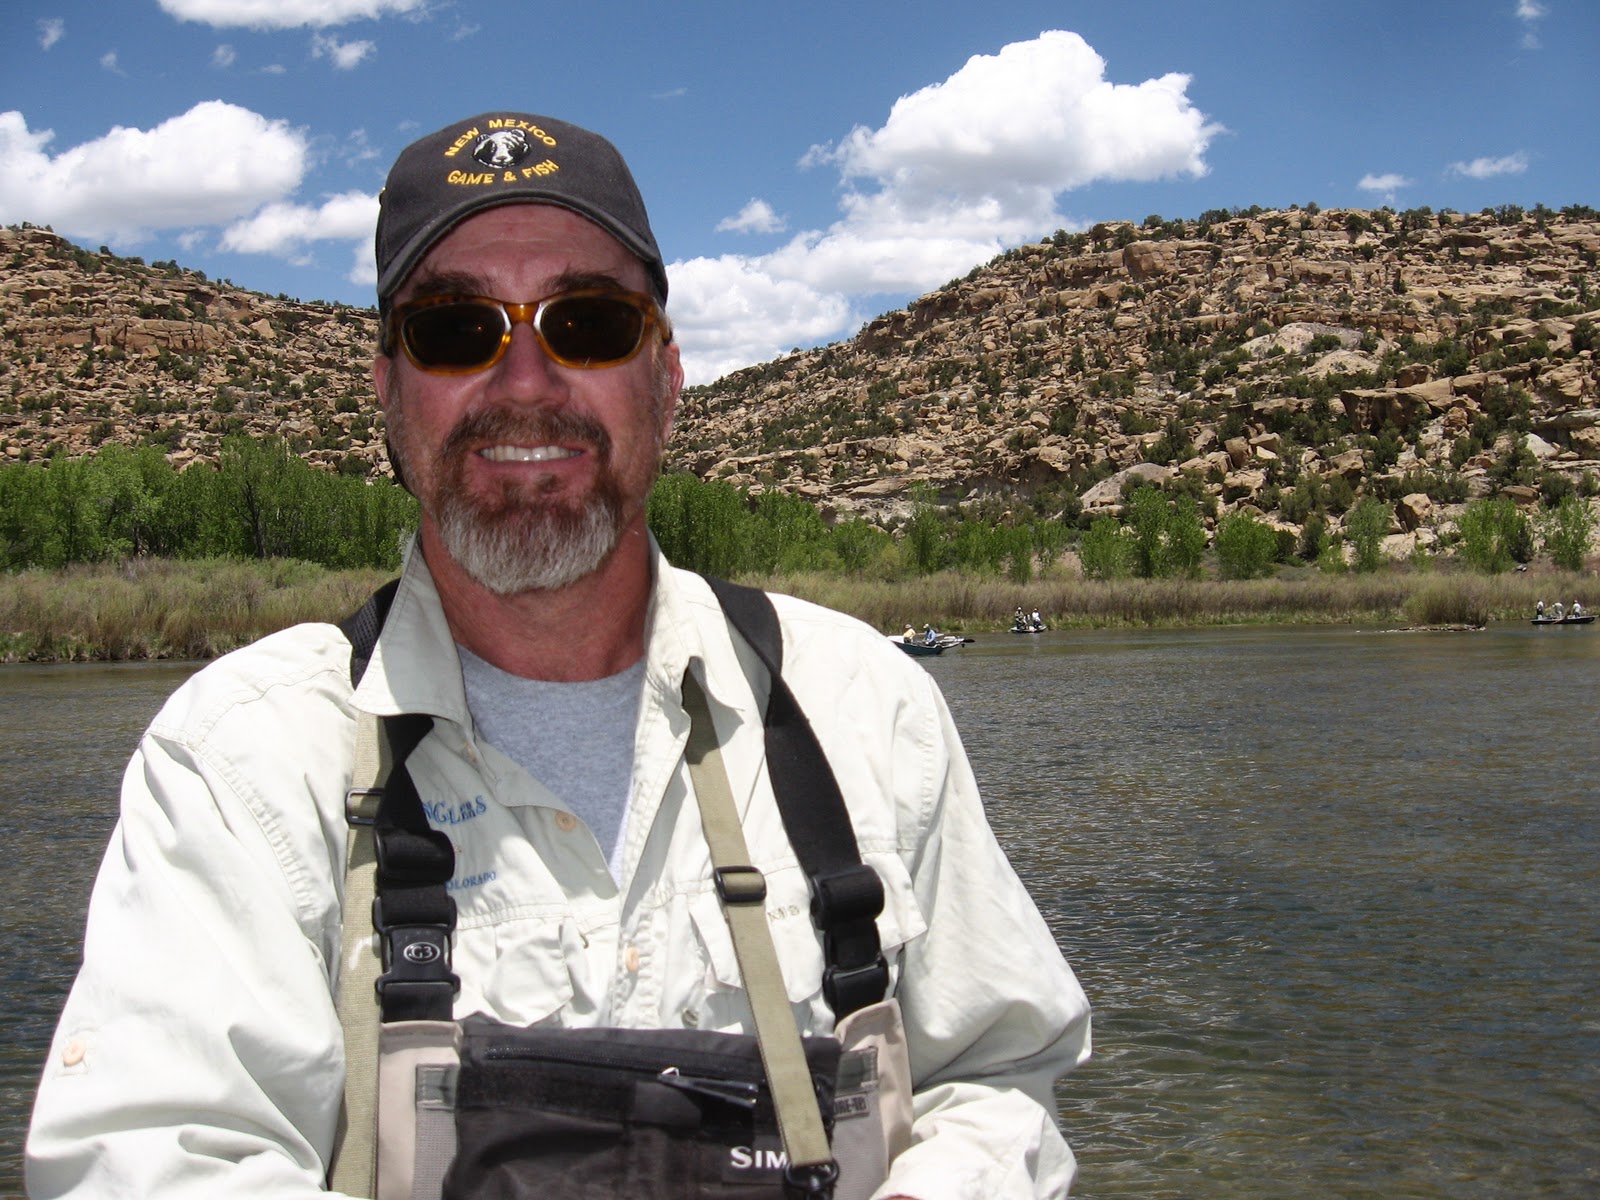 OUTDOORS NM: Fall Fishing on the San Juan River - Tips and Tricks